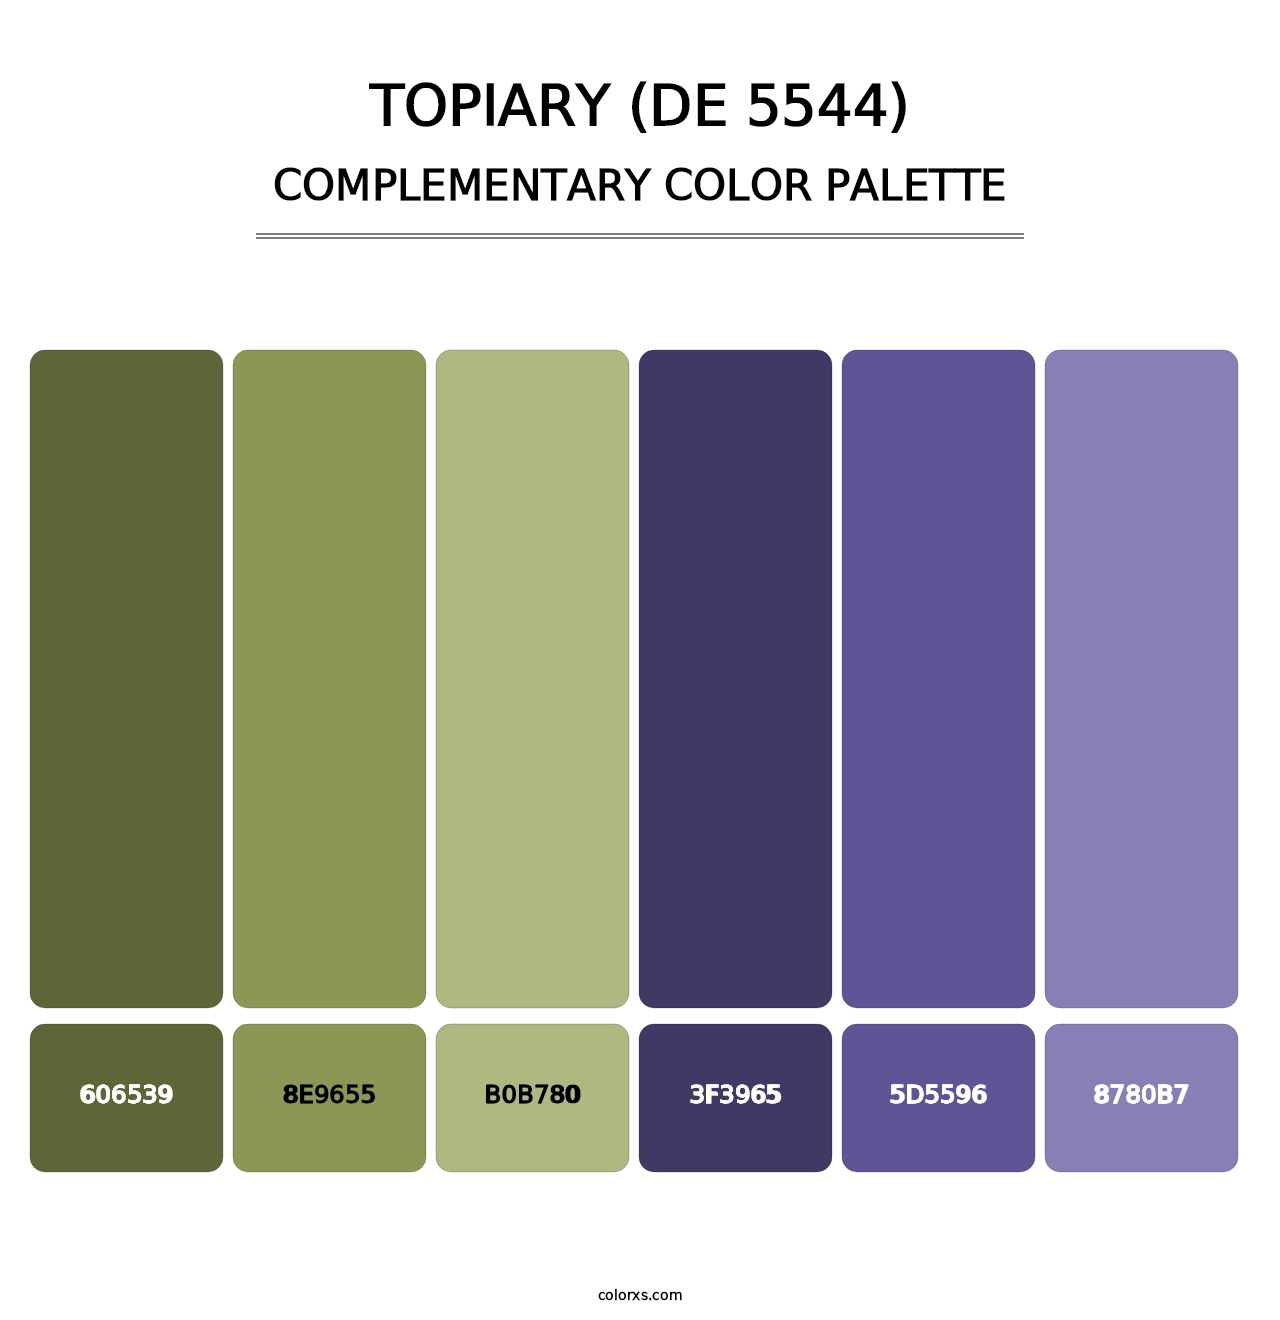 Topiary (DE 5544) - Complementary Color Palette